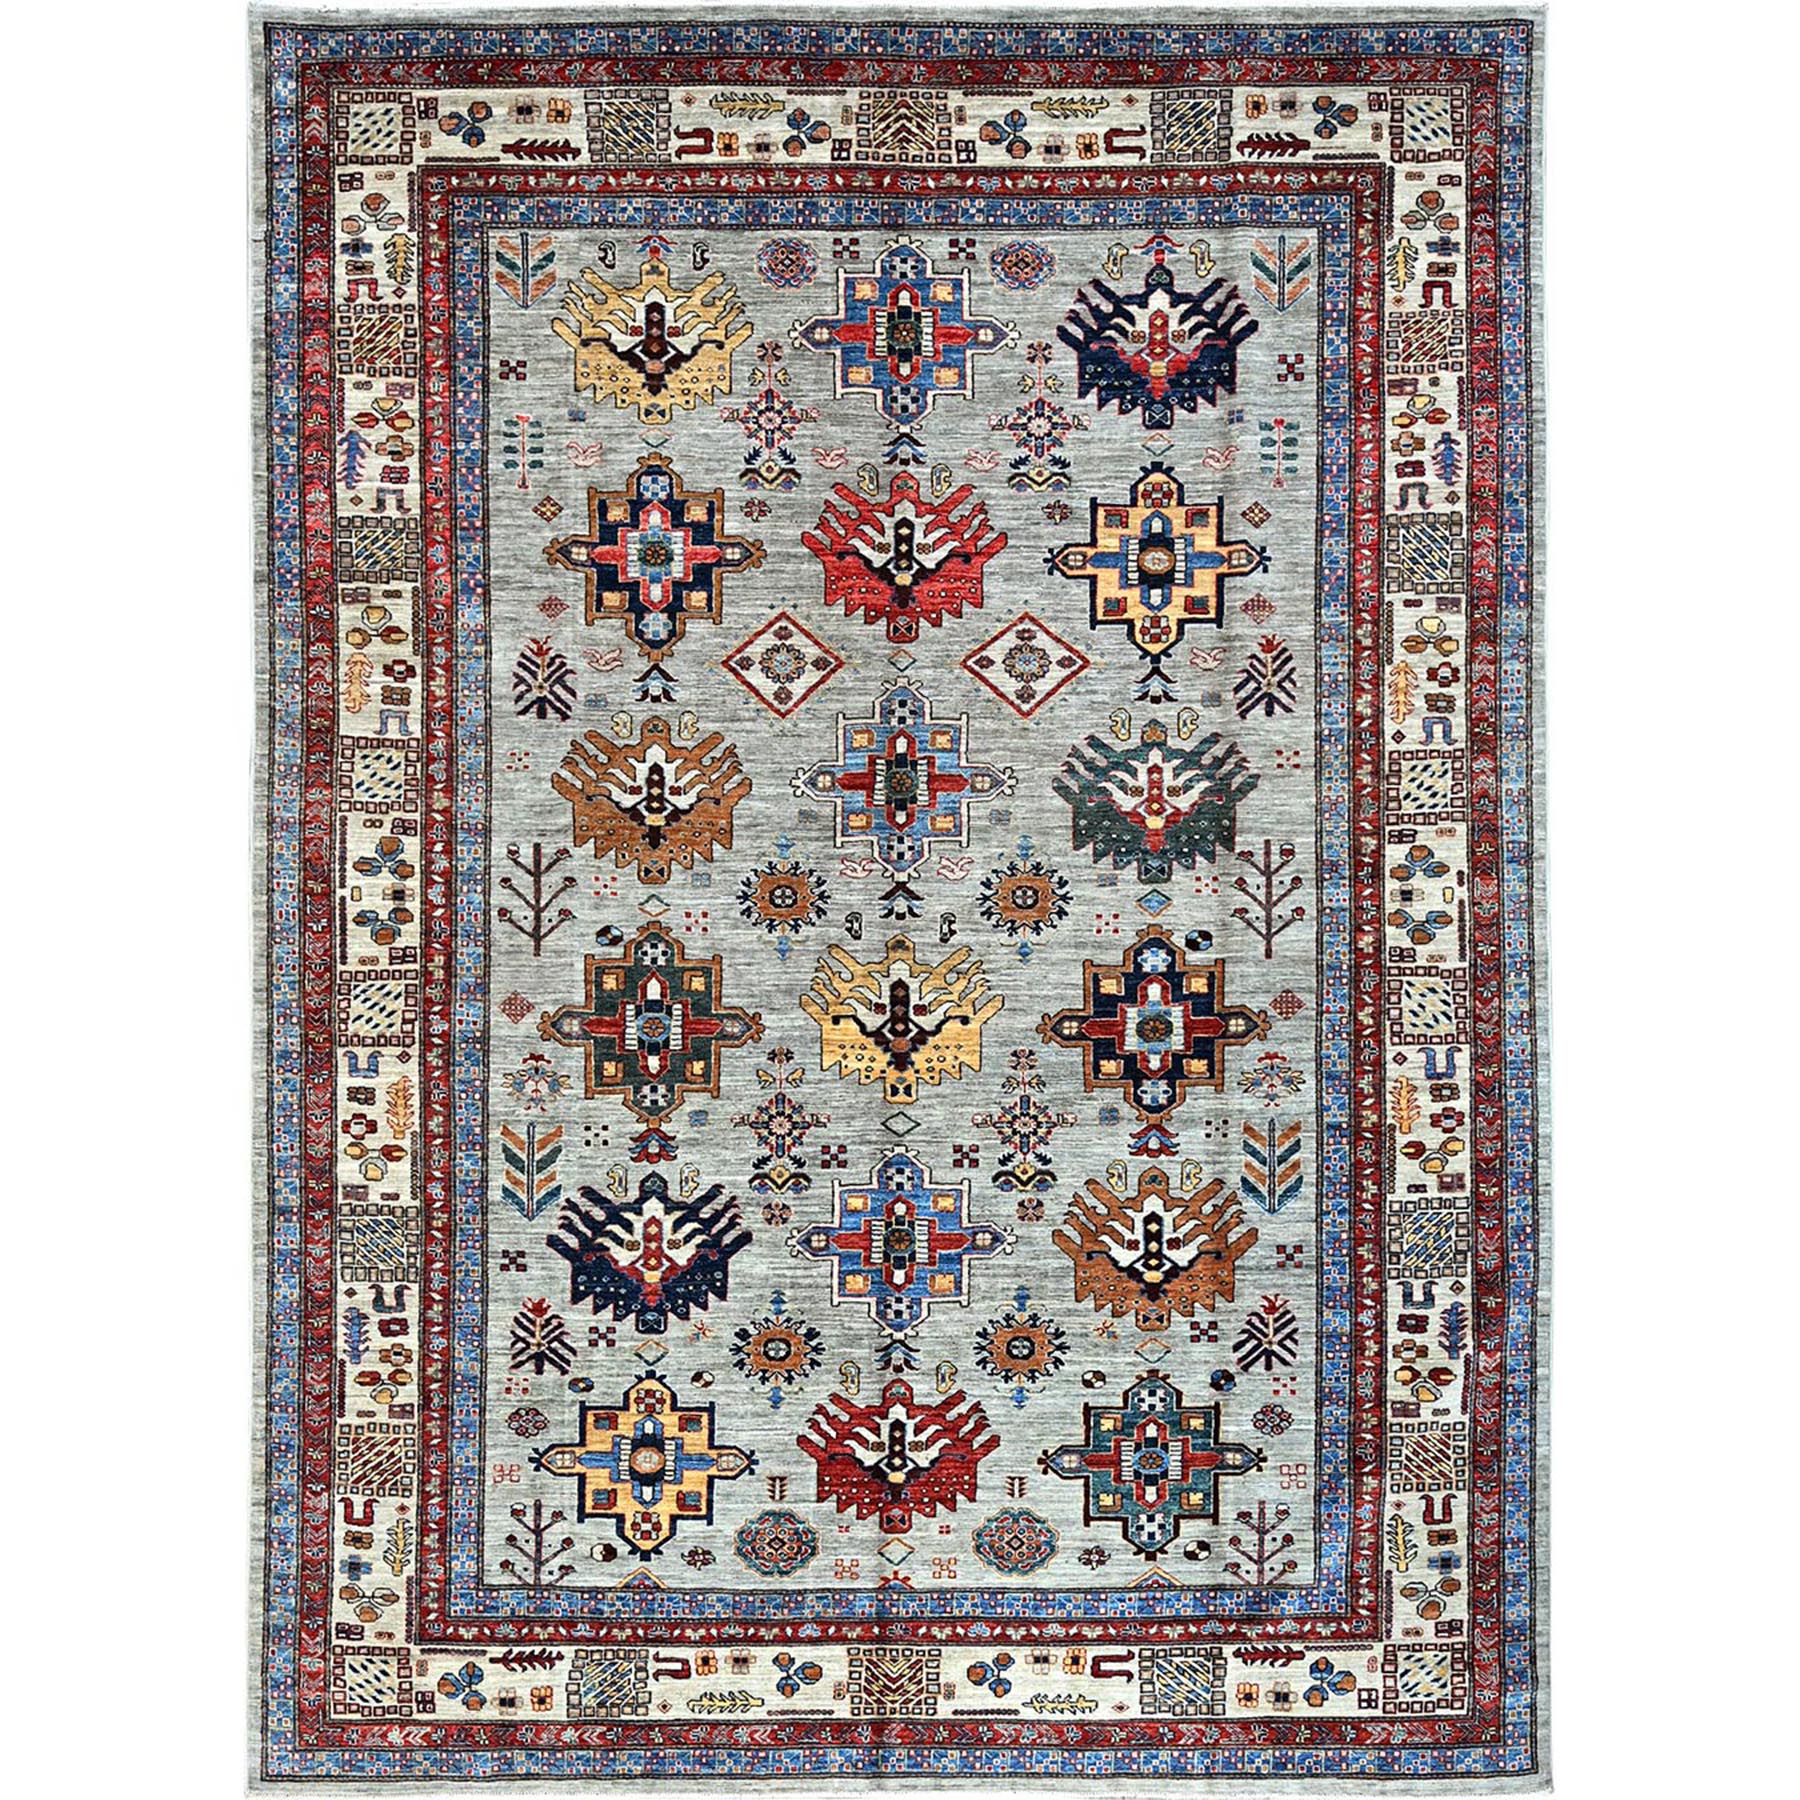 Mirage Gray, Afghan Super Kazak with Tribal Medallions, Natural Dyes Densely Woven, Extra Soft Wool Hand Knotted, Oriental Rug 